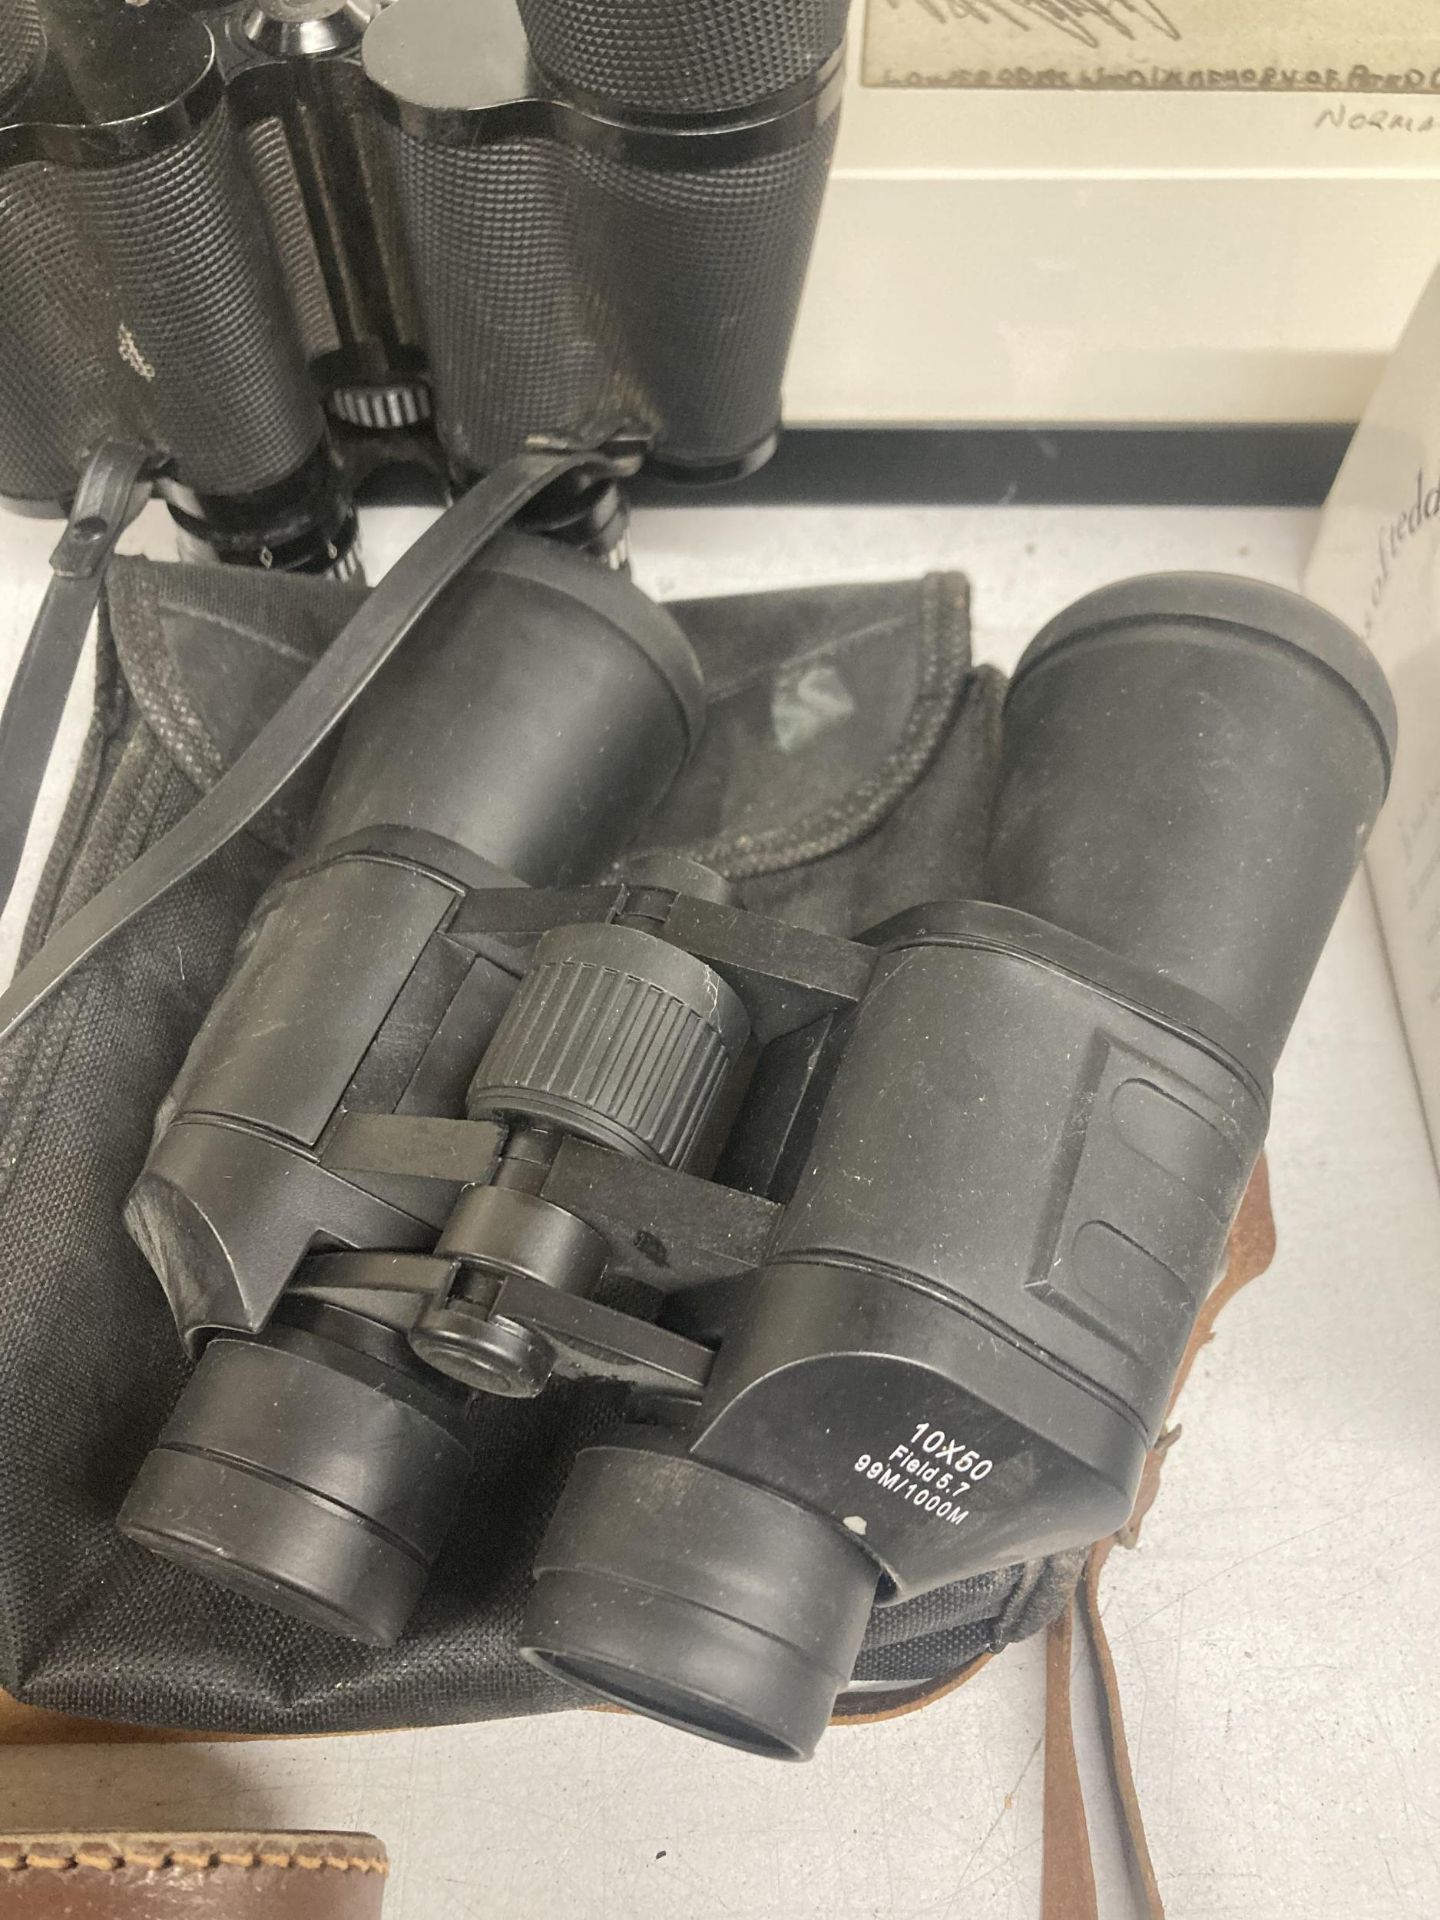 A THREE PAIRS OF BINOCULARS MADE IN BRITAIN AND HONG KONG PLUS A VINTAGE AGFA SILEETE CAMERA - Image 5 of 6